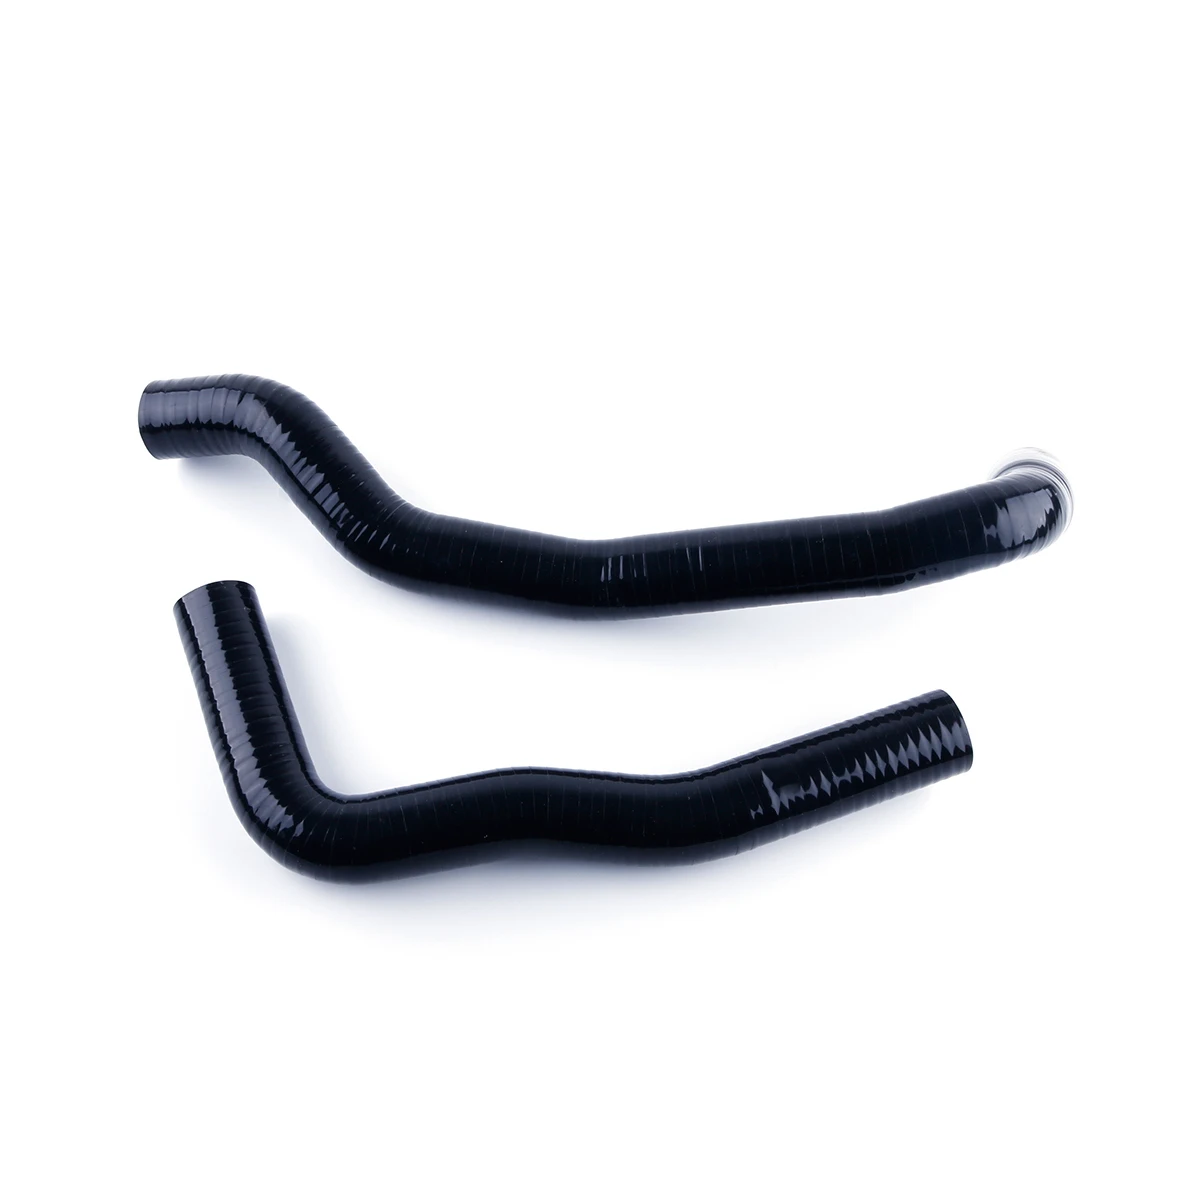 

For 1996-2000 Toyota Mark II JZX100 Chaser Cresta 1JZ-GTE 1JZGTE 1997 1998 1999 Silicone Radiator Hoses Kit Silicon Tubes 2Pcs